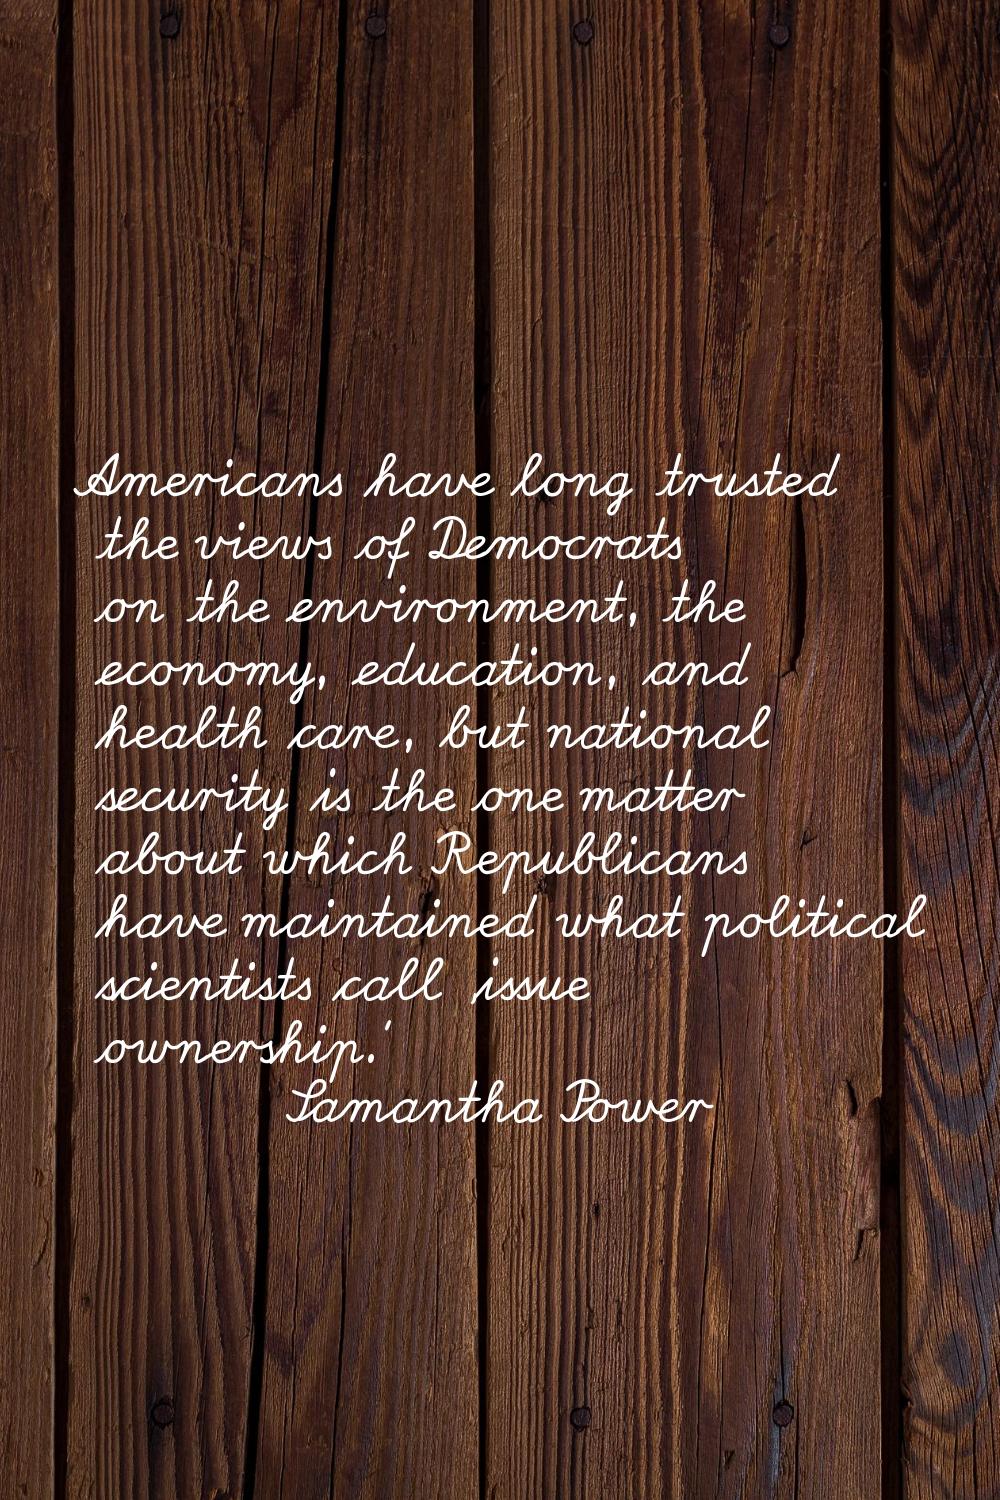 Americans have long trusted the views of Democrats on the environment, the economy, education, and 